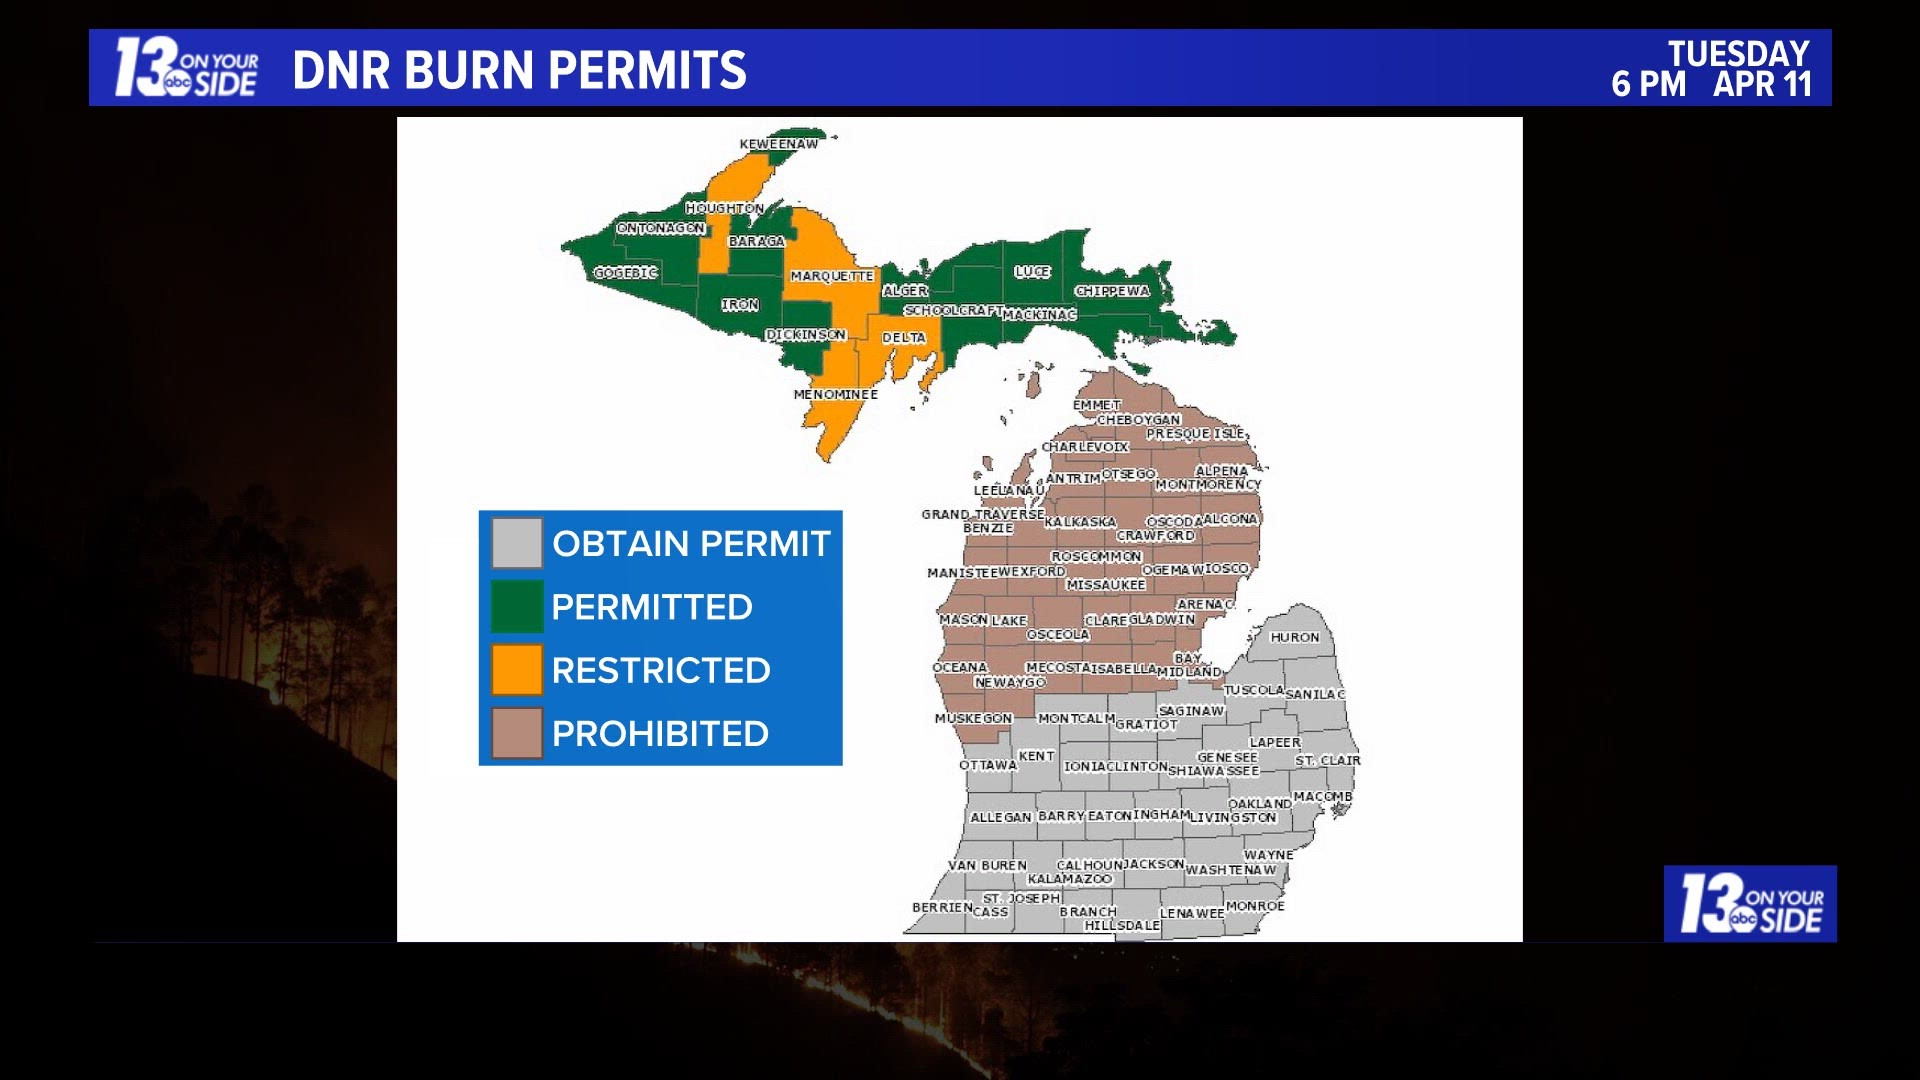 This is the Michigan DNR burn permits as of Tuesday, April 11, 2023